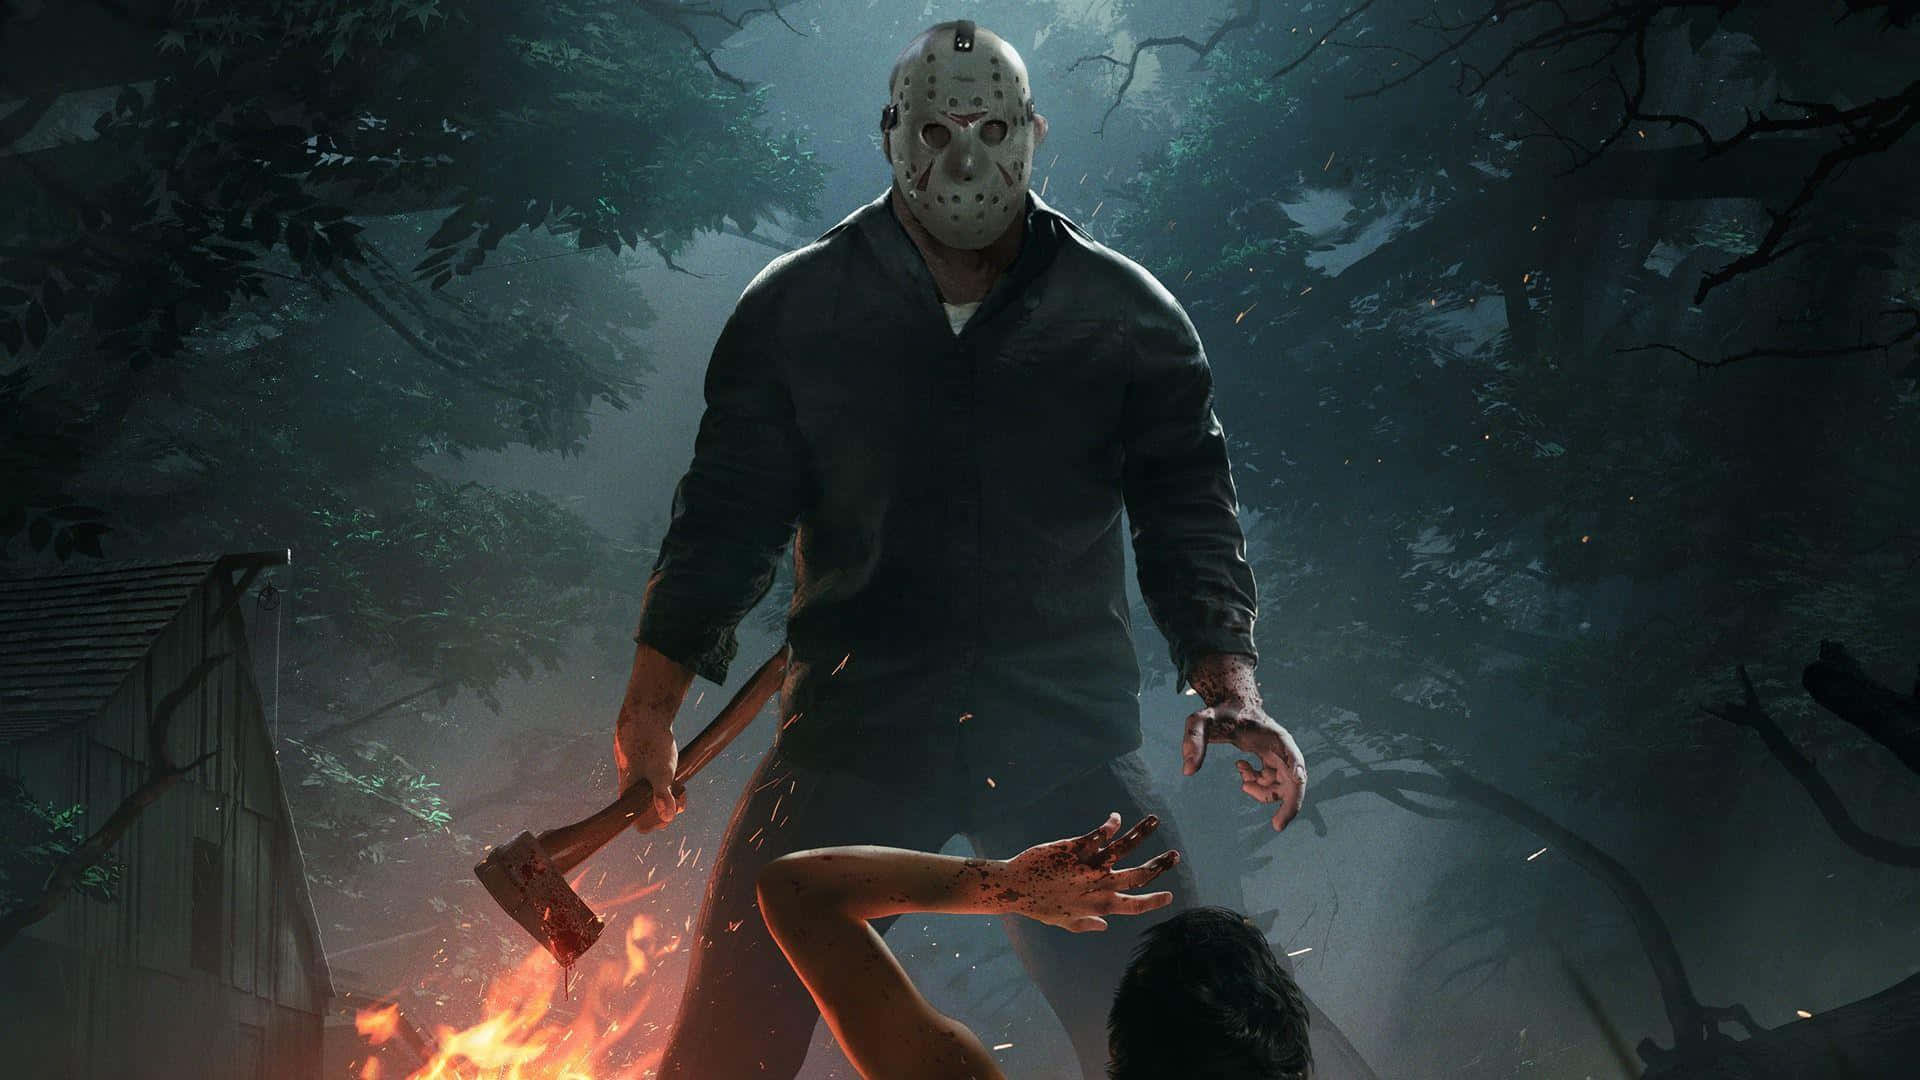 Jason Voorhees, the unstoppable slasher